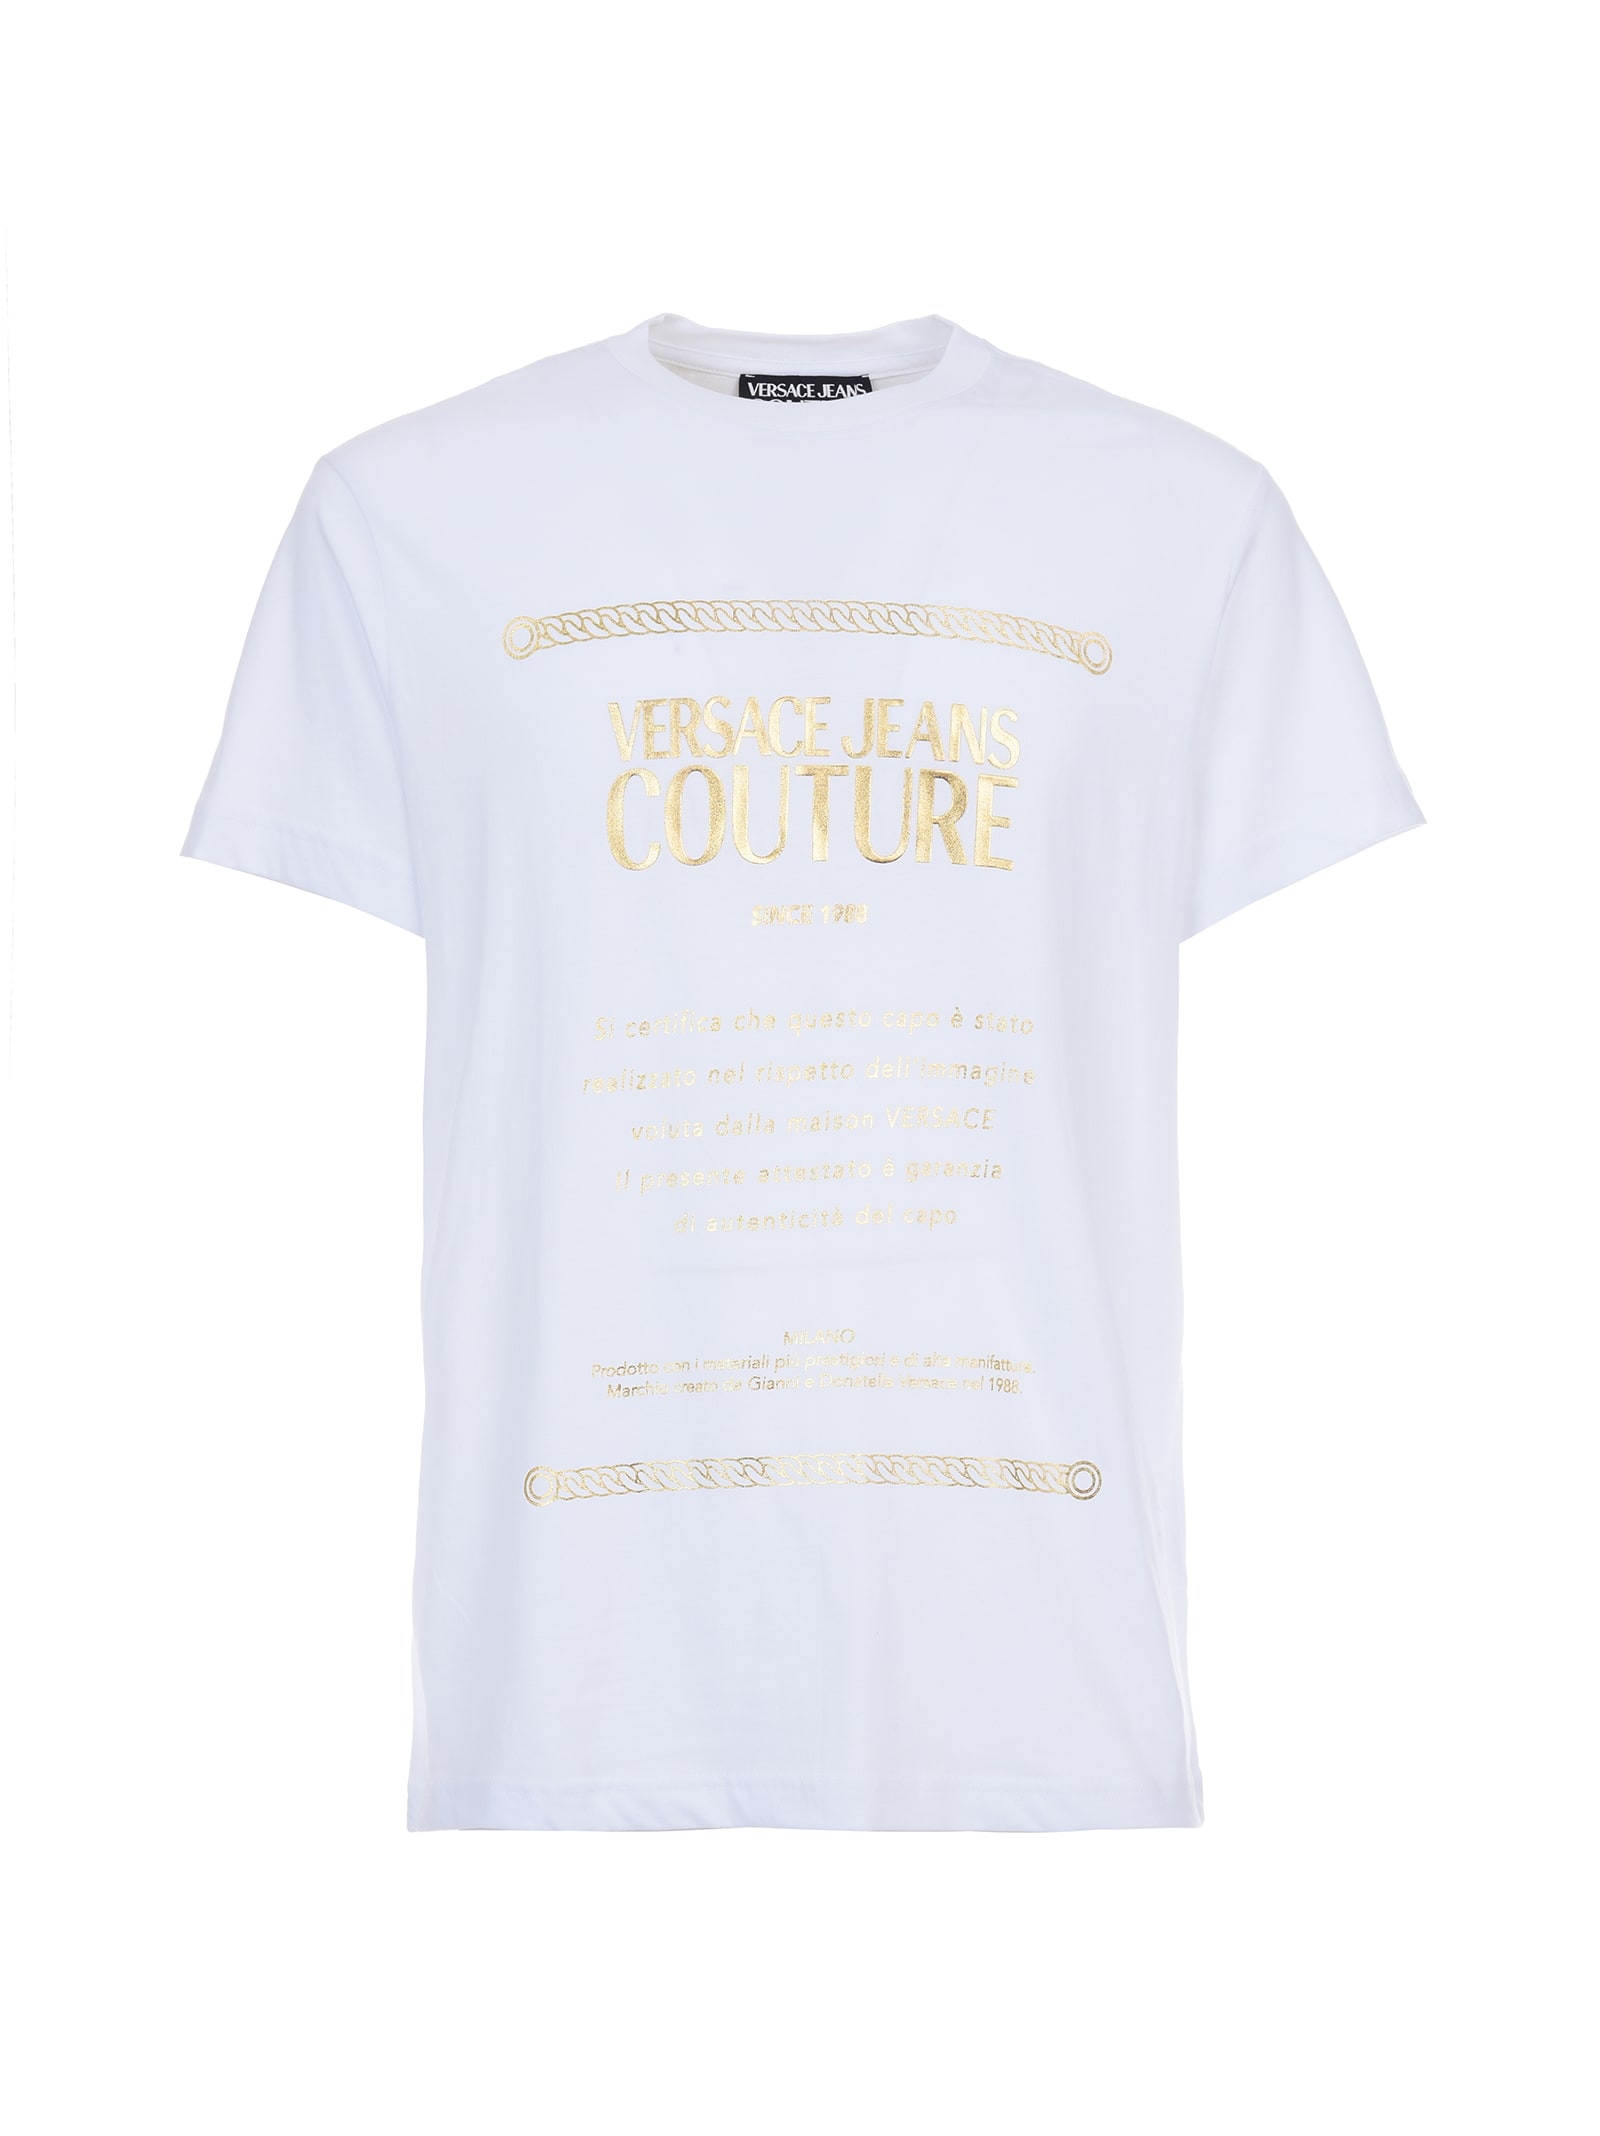 Versace Jeans Couture Classic White T-shirt With Gold Logo